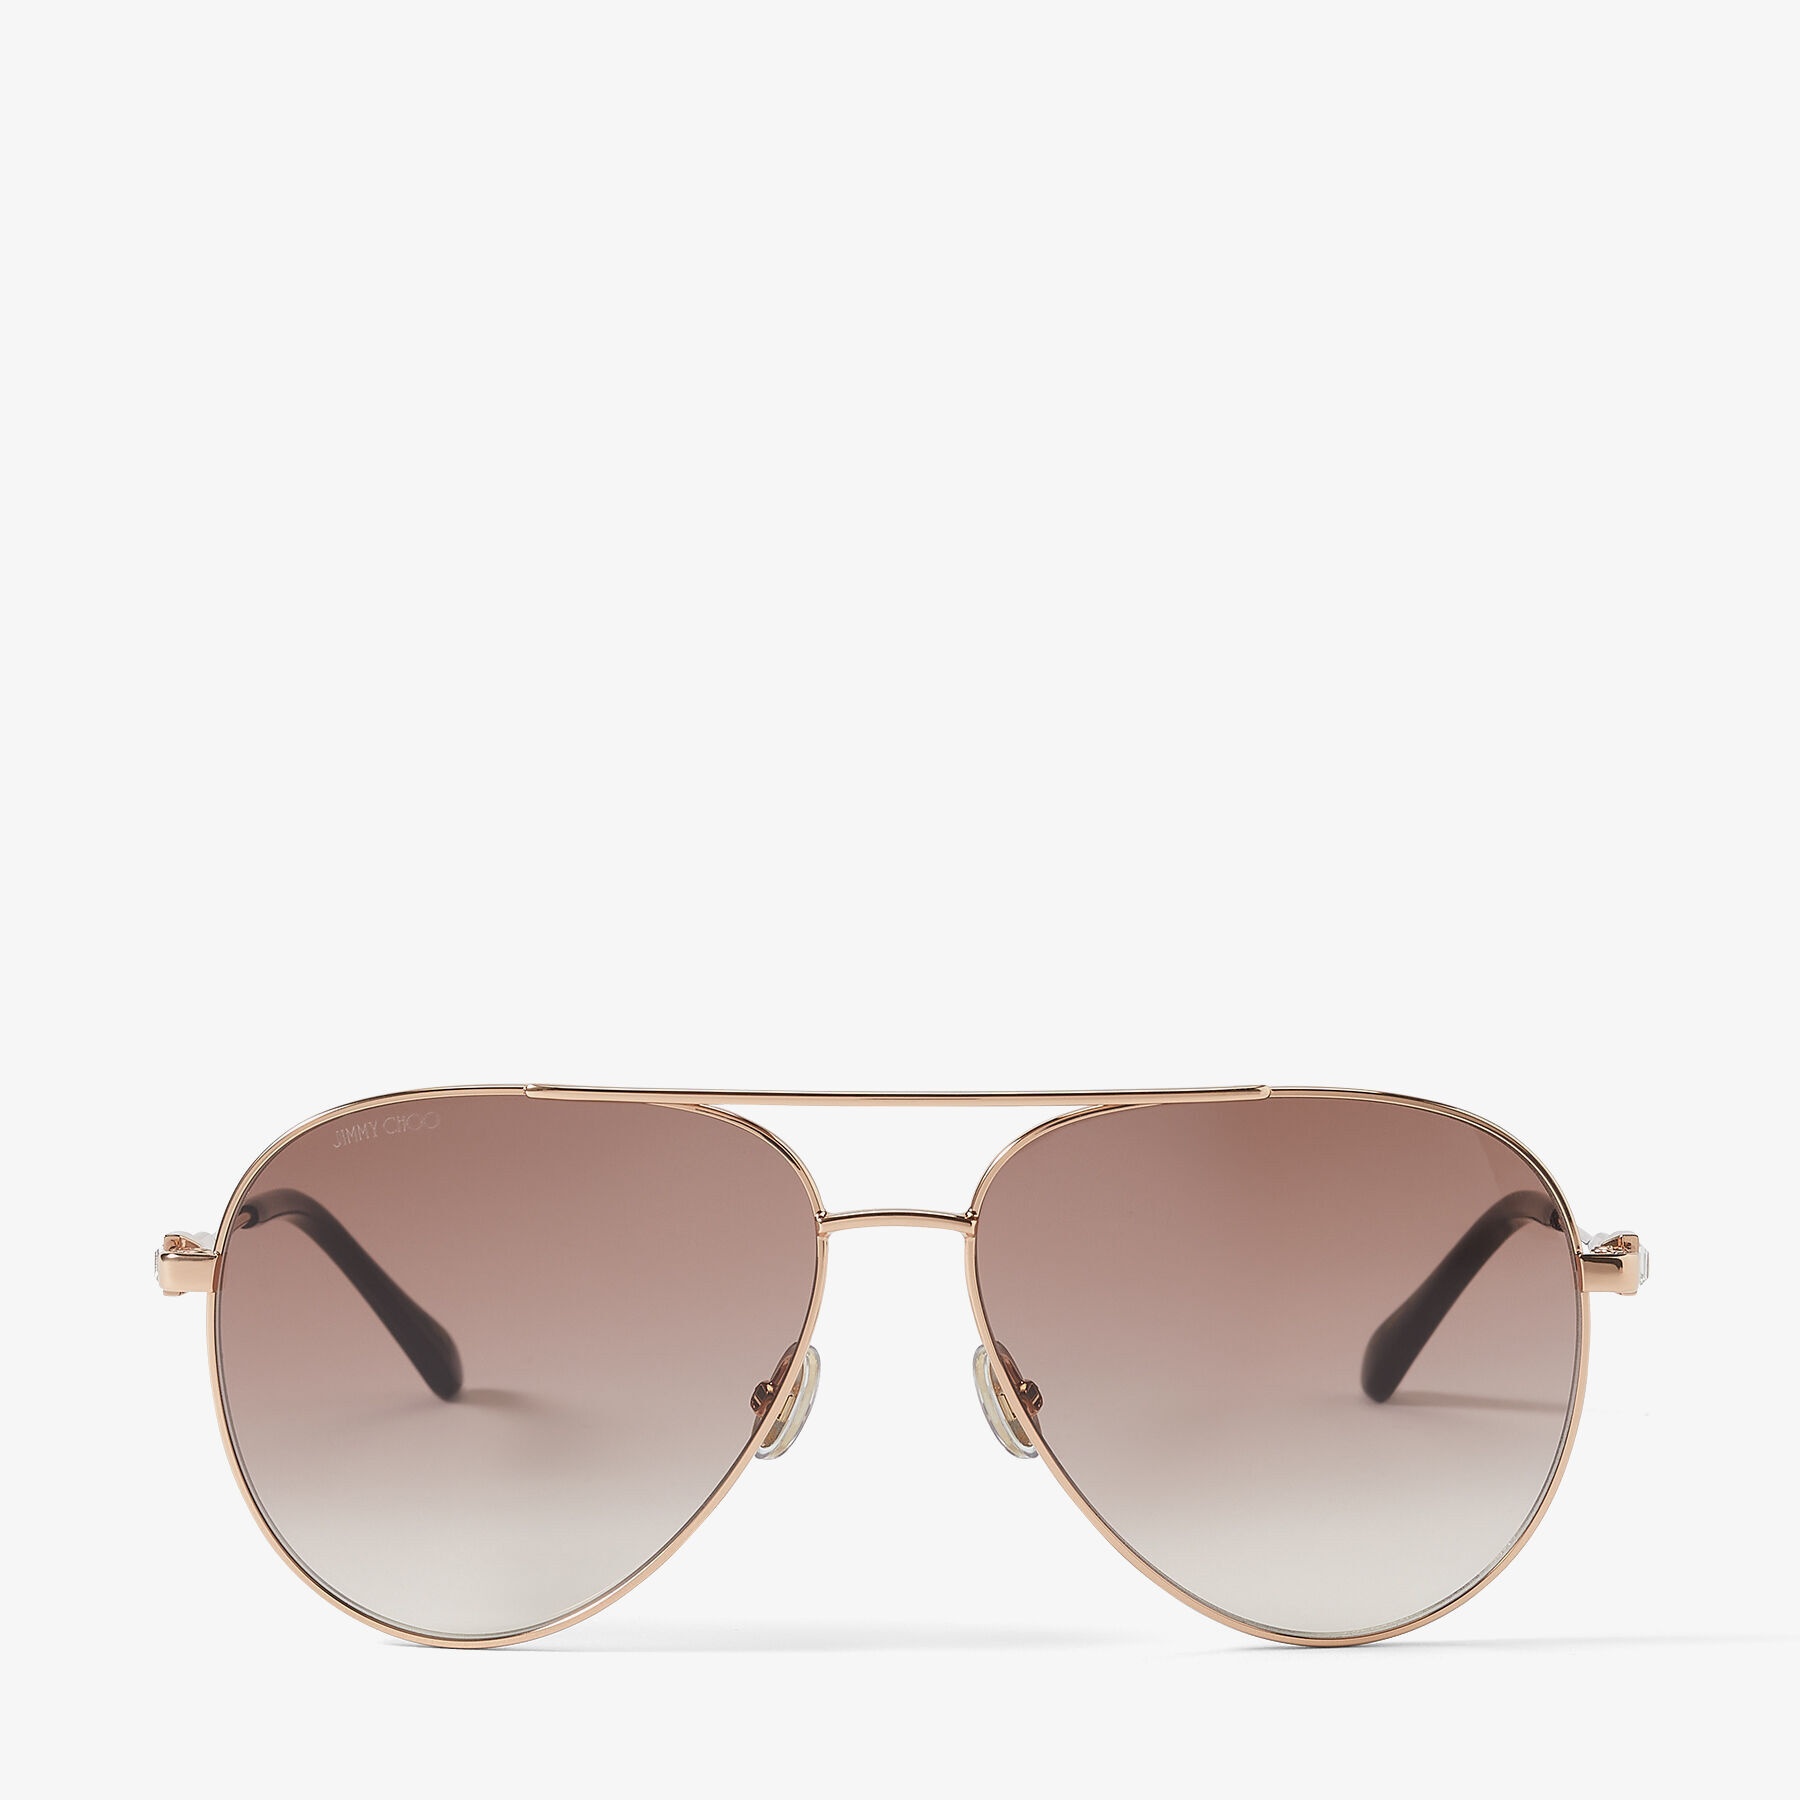 Olly
Copper Gold Aviator Sunglasses with Brown Shaded Lenses and Crystal Embellishment - 1